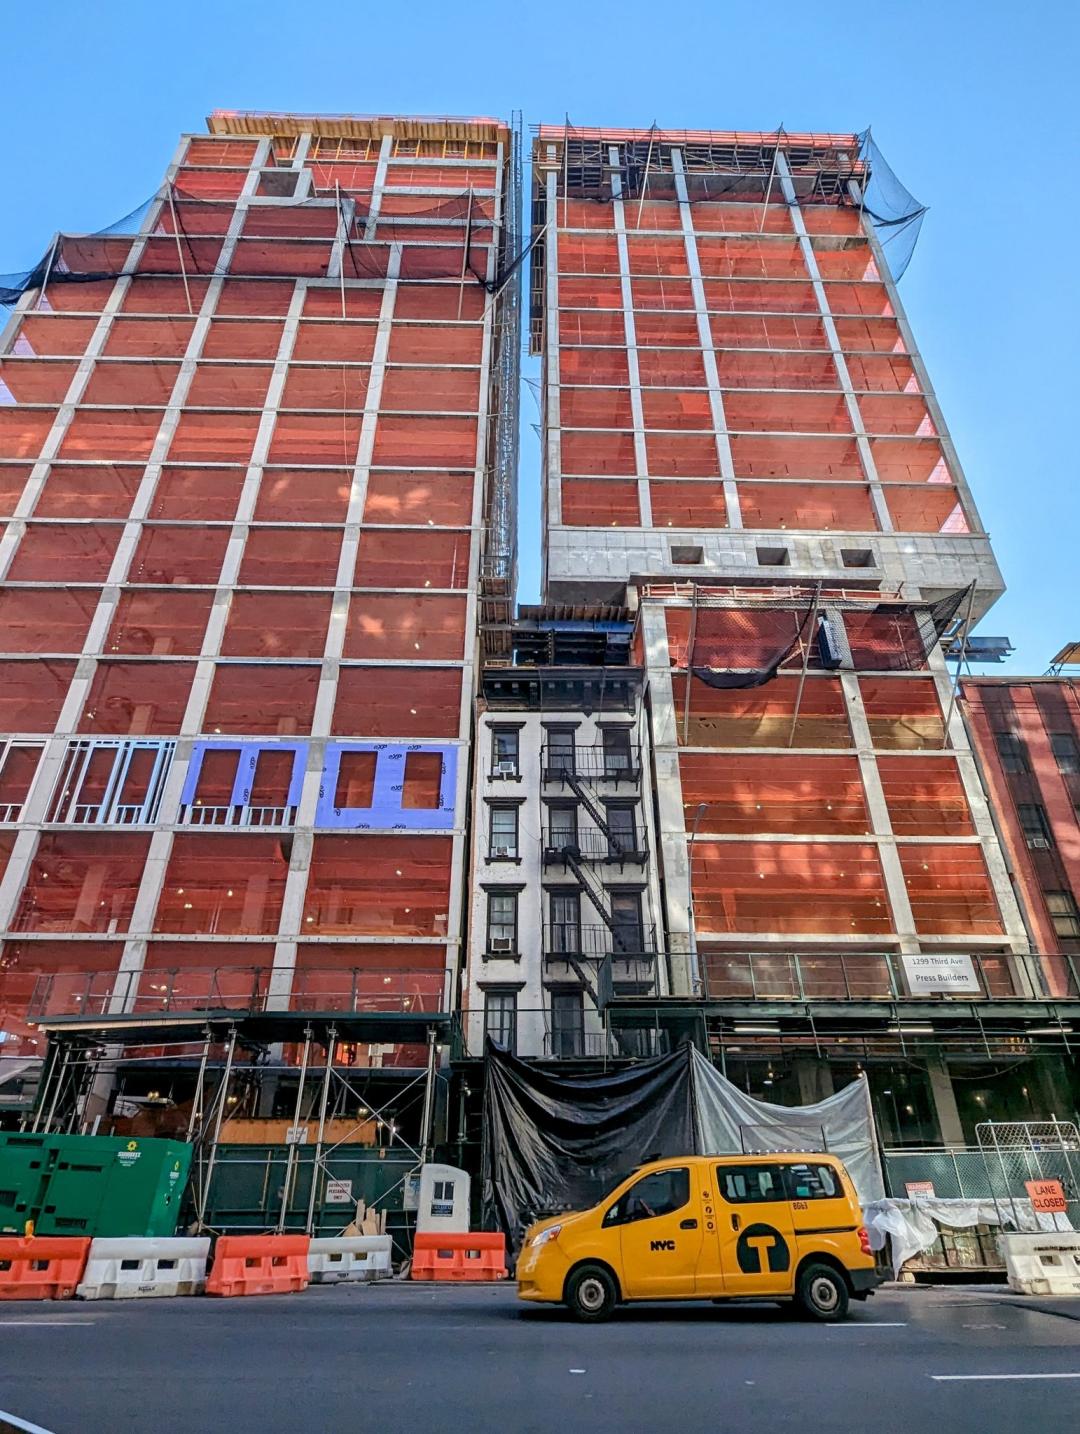 NYC Construction with a new building being build around and overtop an old apartment building